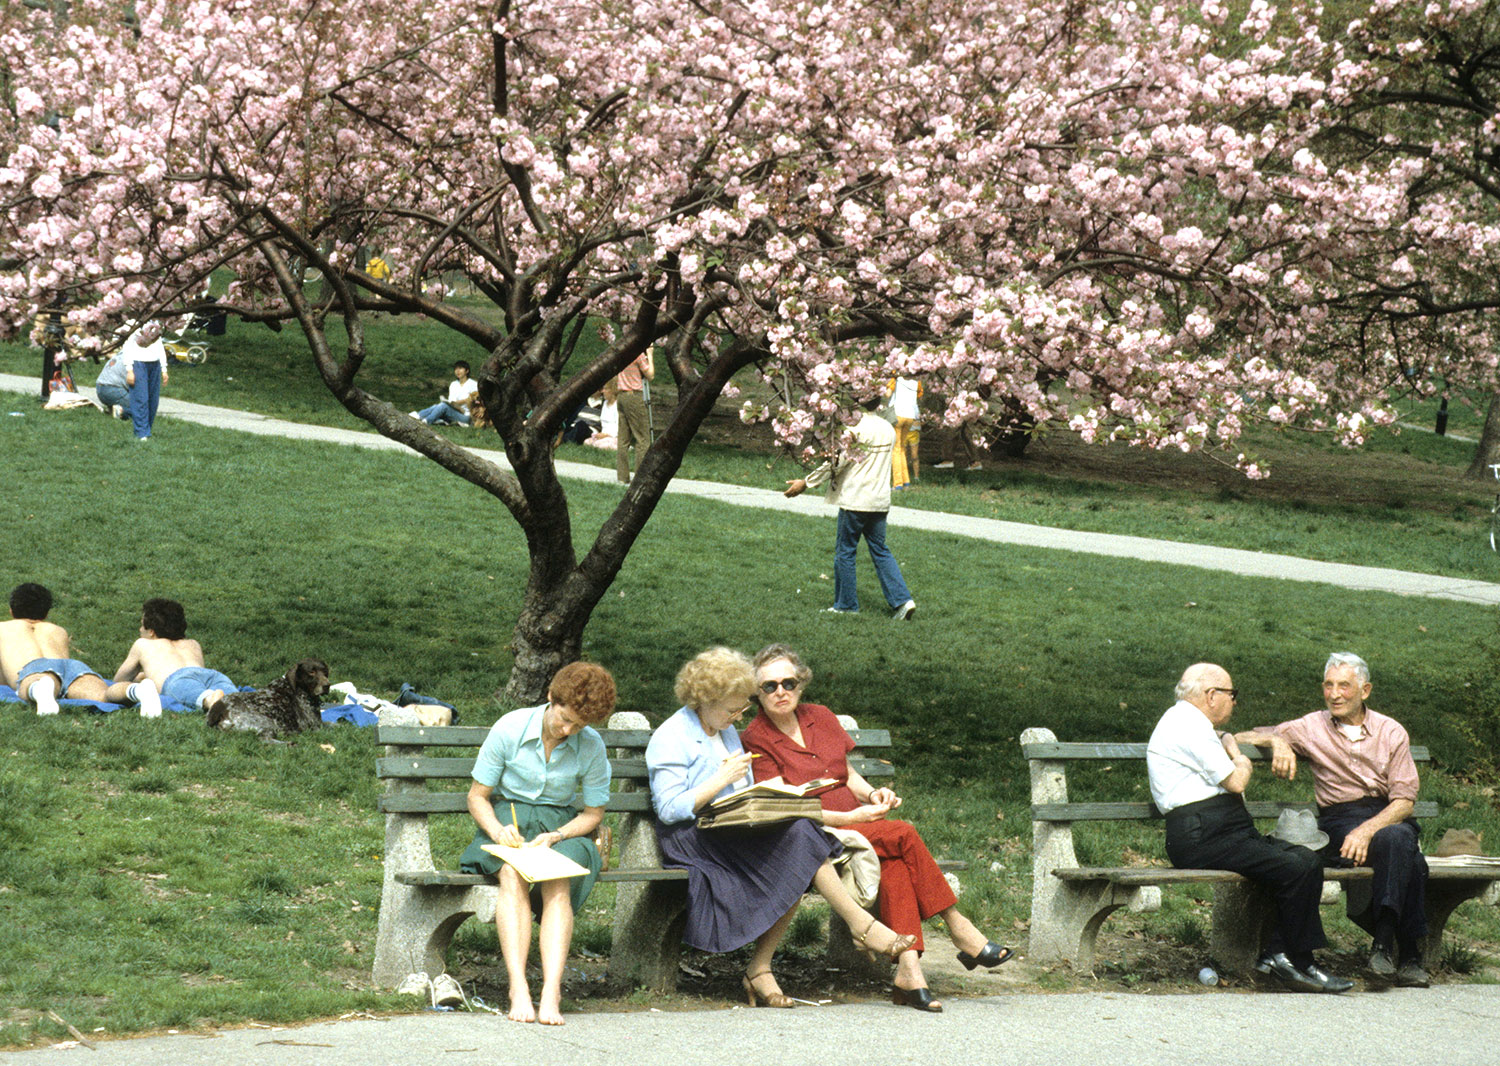 Sitting Under The Trees In Central Park 1983